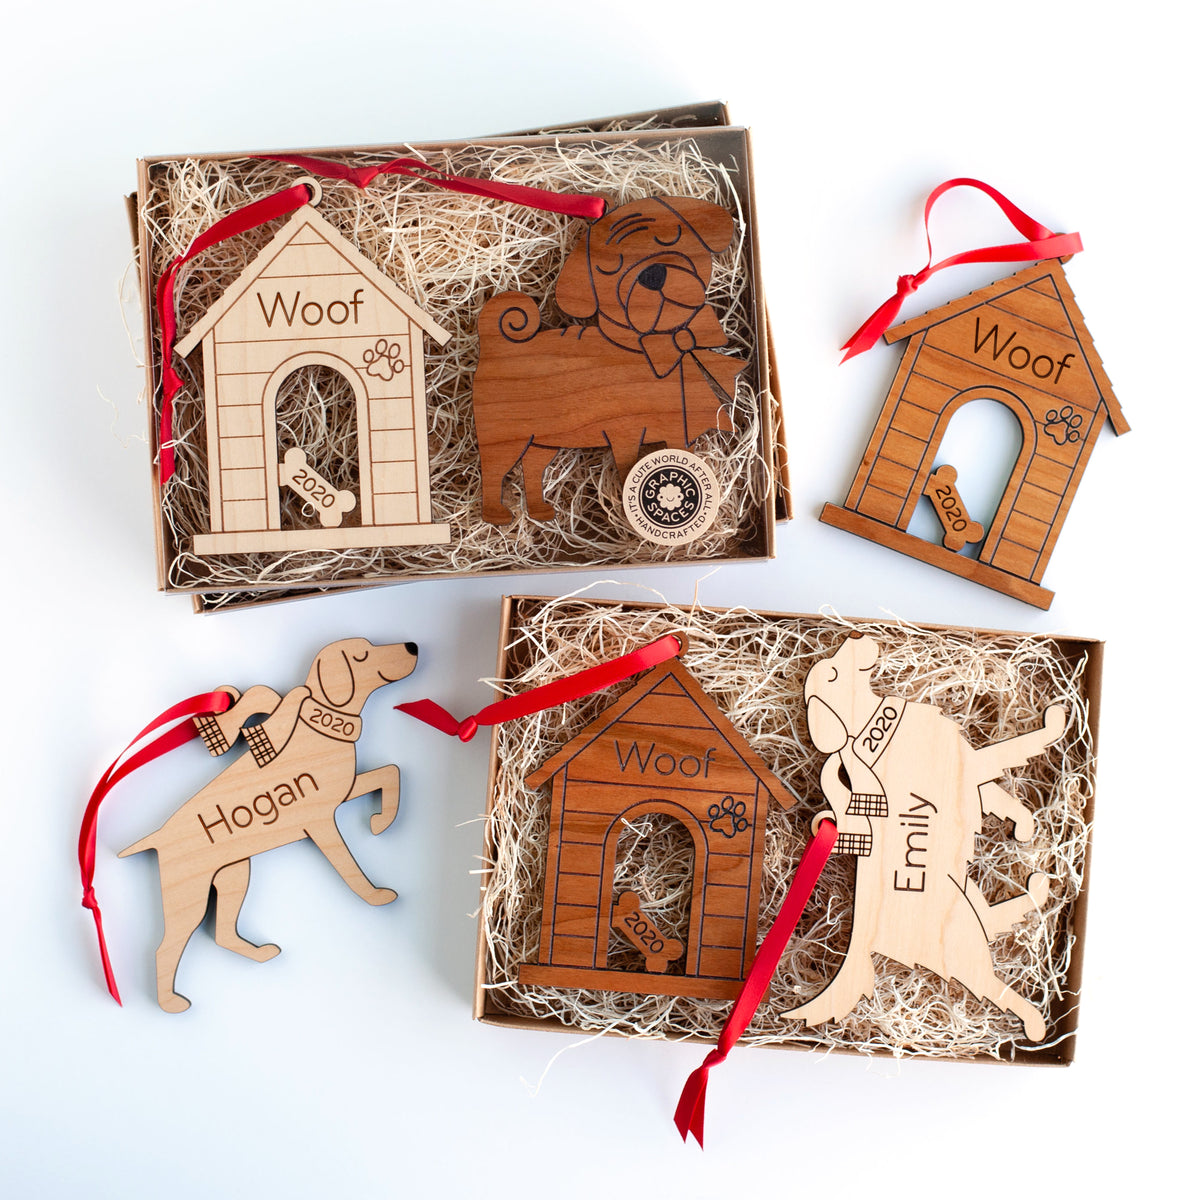 Dog House + Dog Wooden Christmas Ornaments - Personalized (Set of 2)